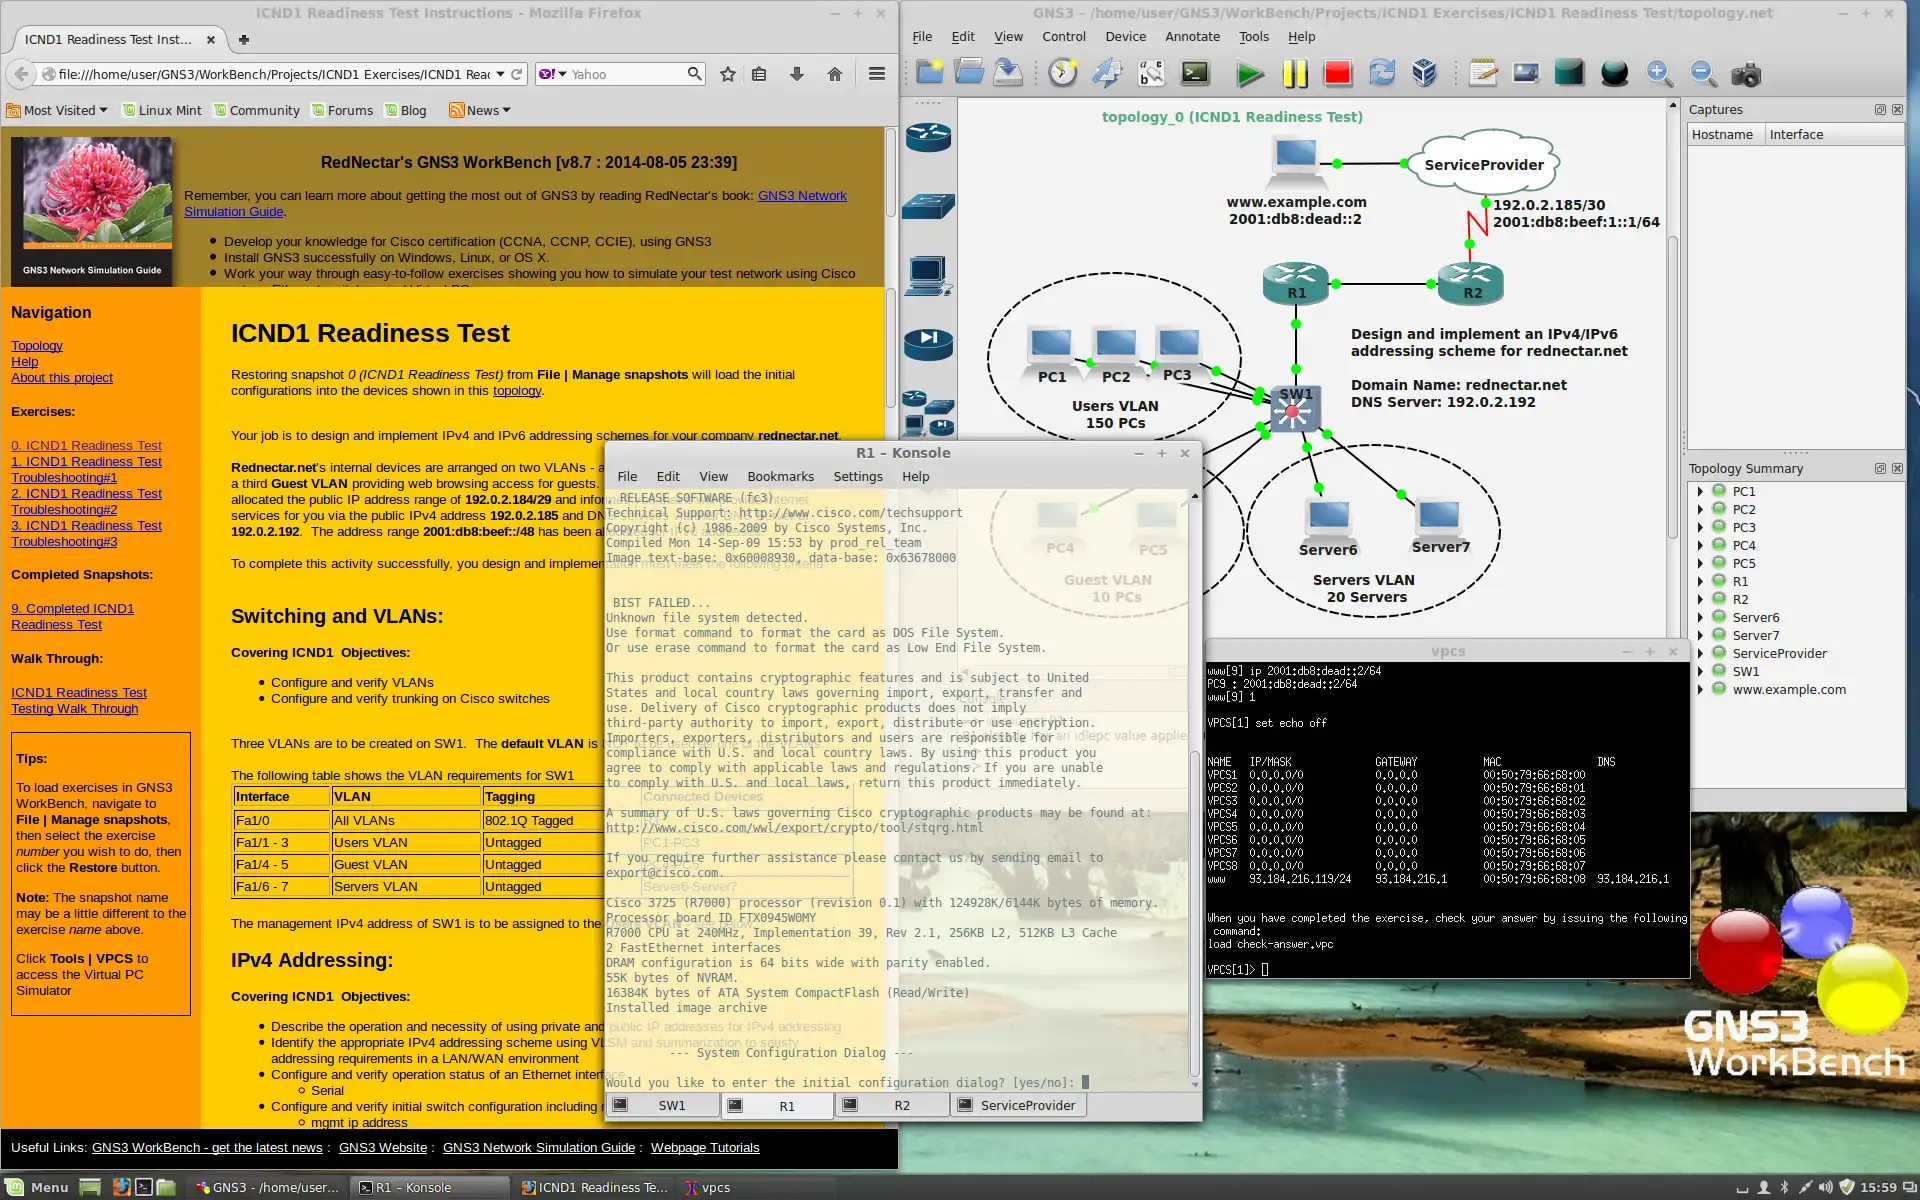 Download web tool or web app GNS3 WorkBench